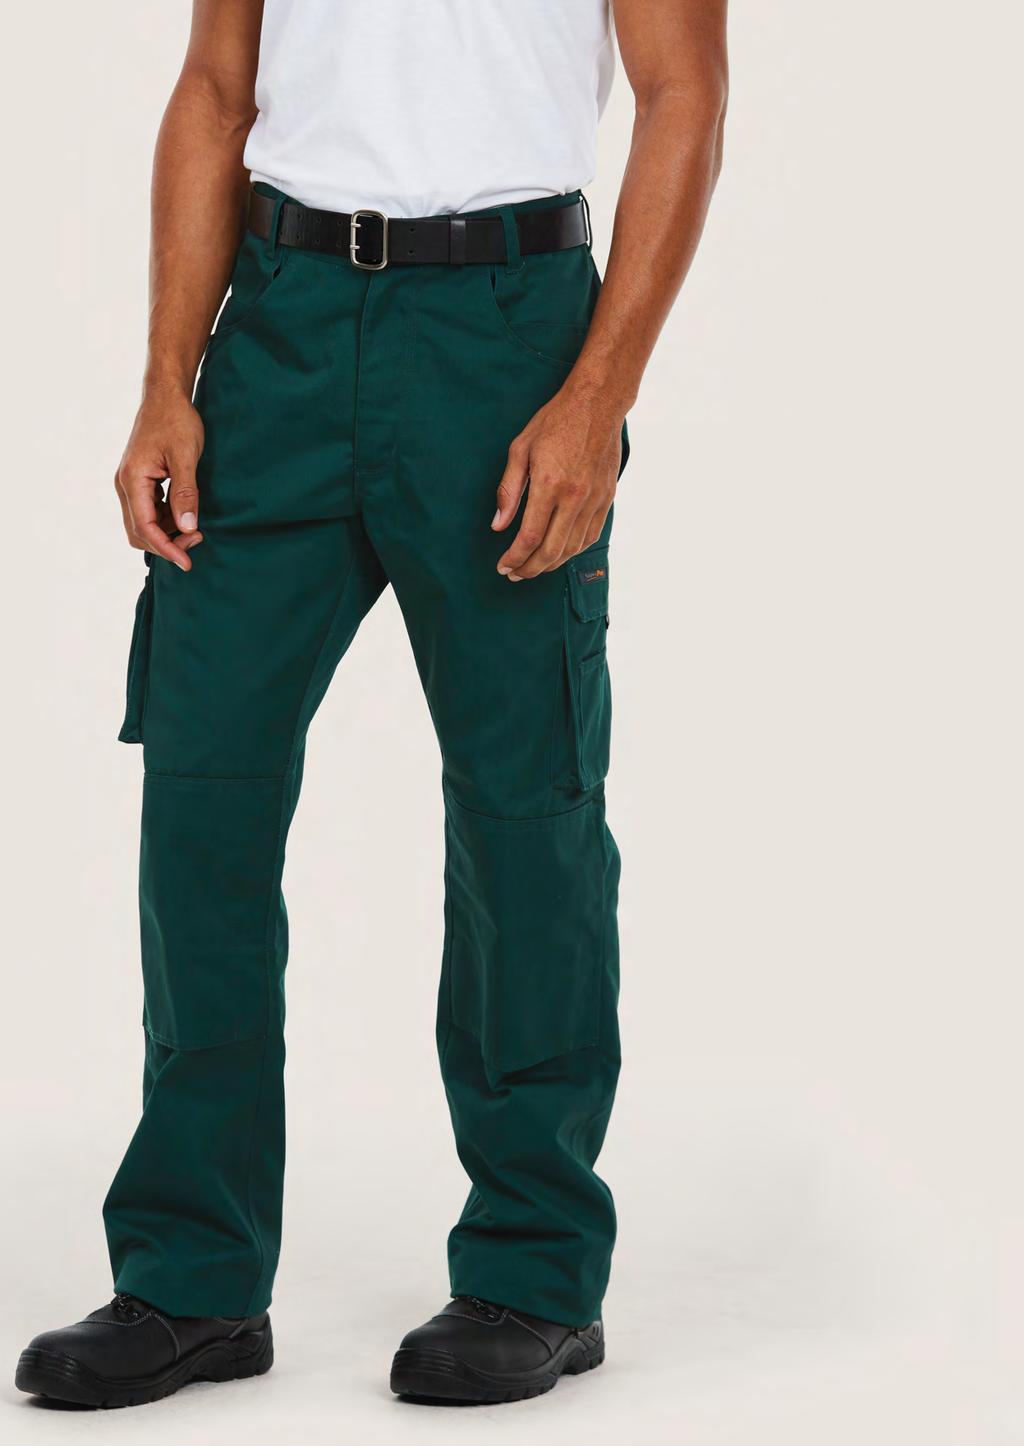 TROUSERS UC906 UNISEX SUPER PRO TROUSERS 330 60 25/5 65% Polyester, 35% Cotton Fabric: 330 /9.